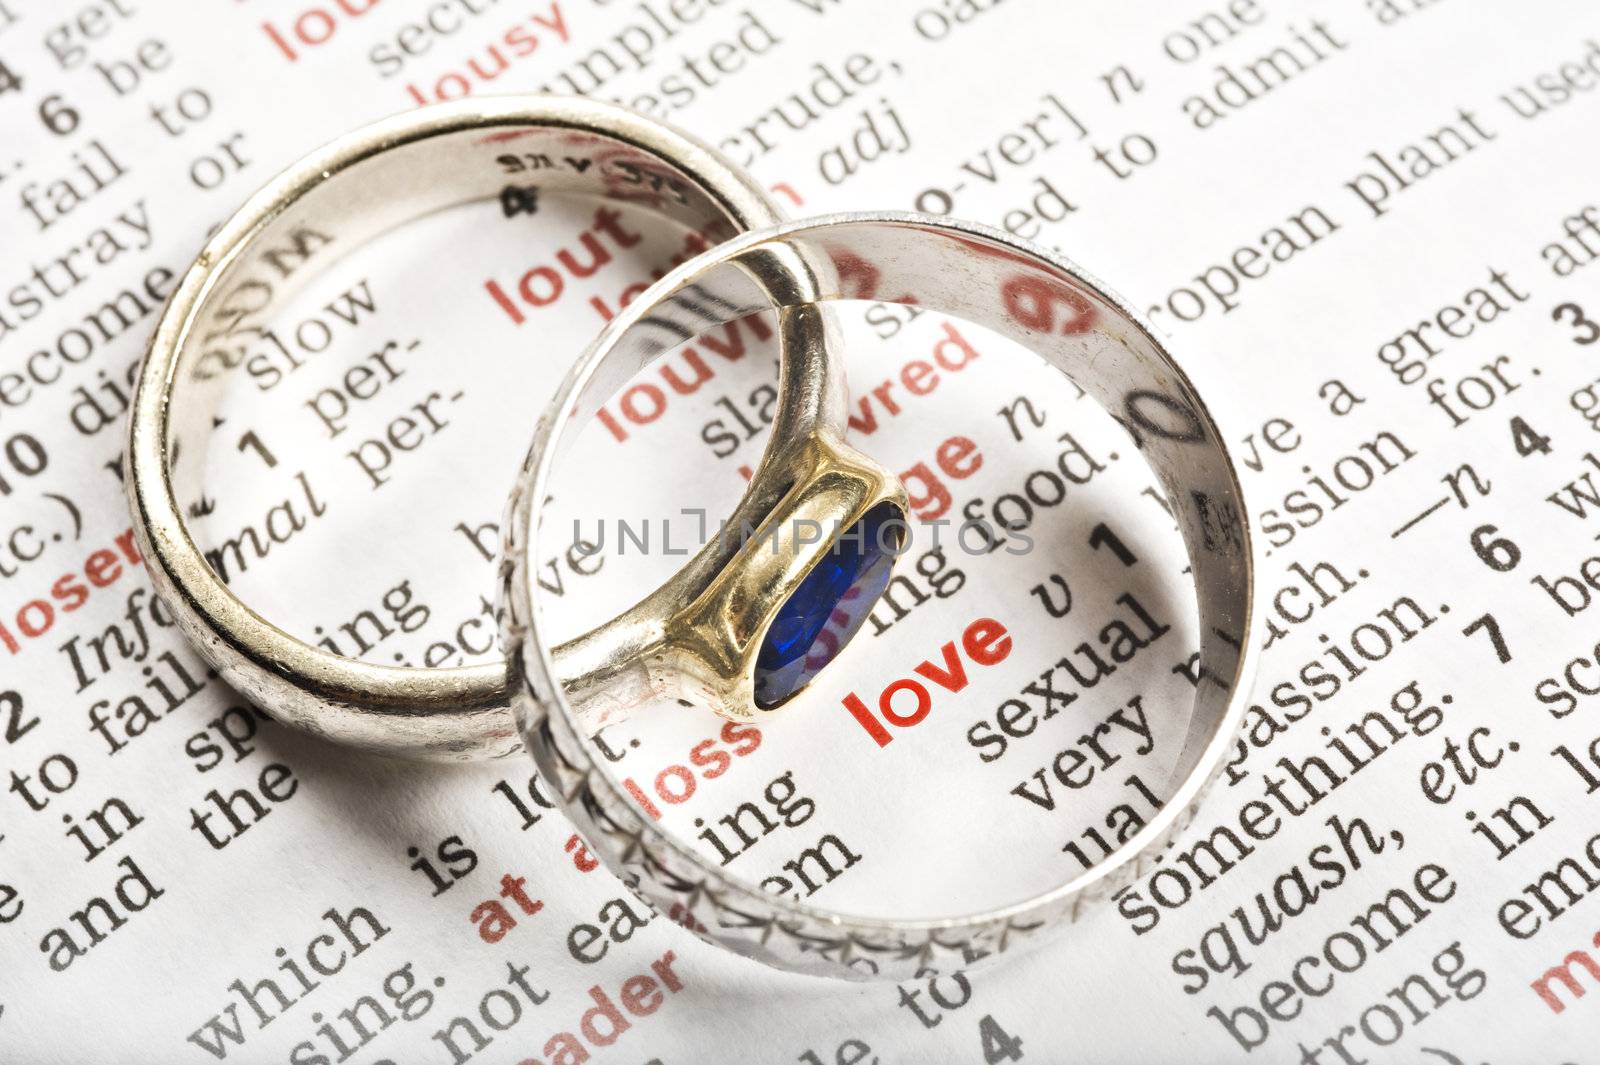 Wedding rings and the word love in dictionary by tish1